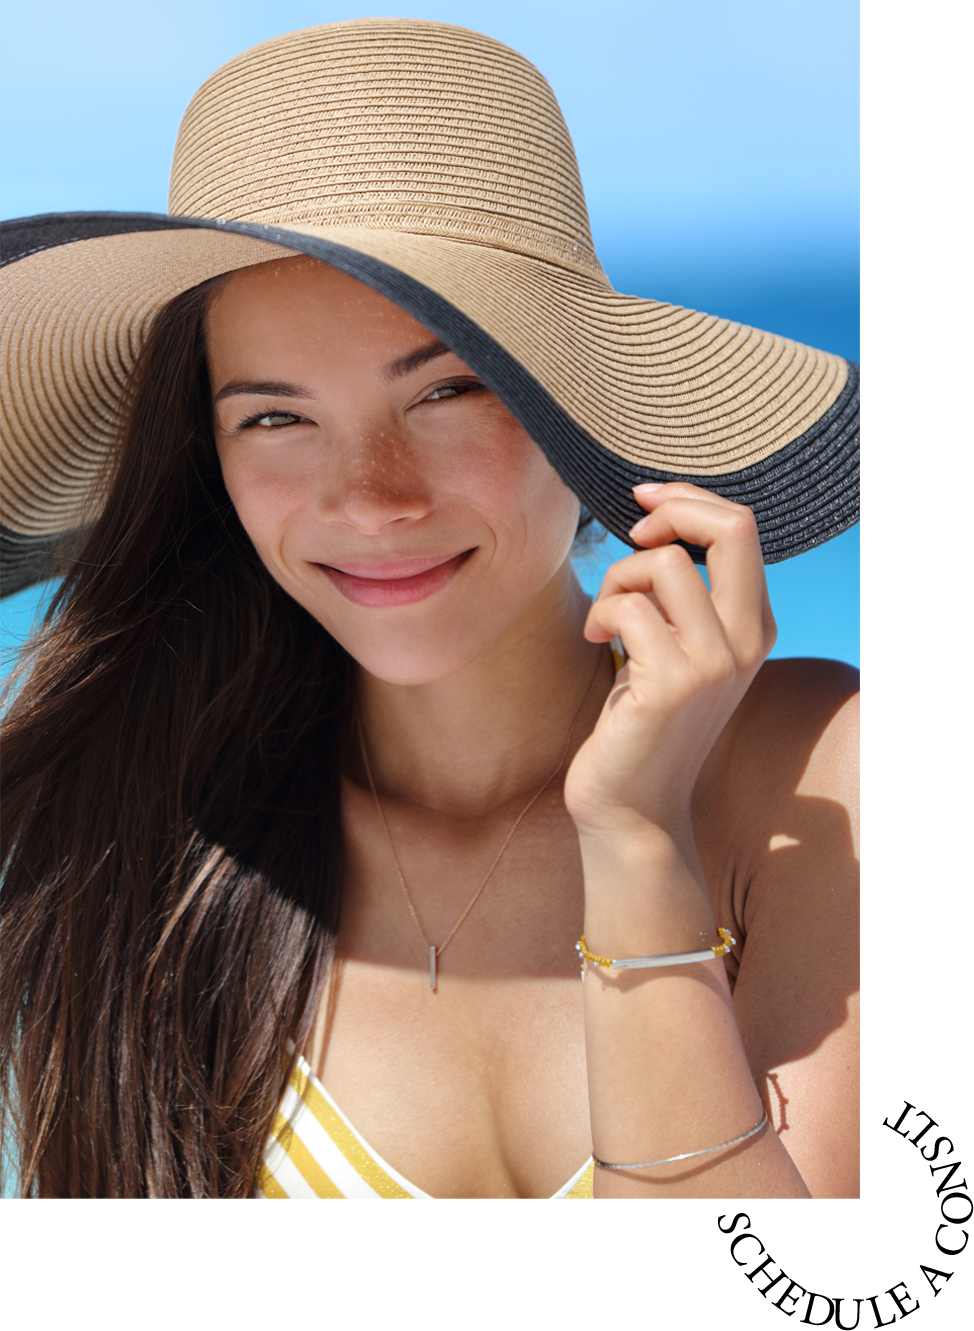 Asian woman with beach hat for face sun protection rhinoplasty